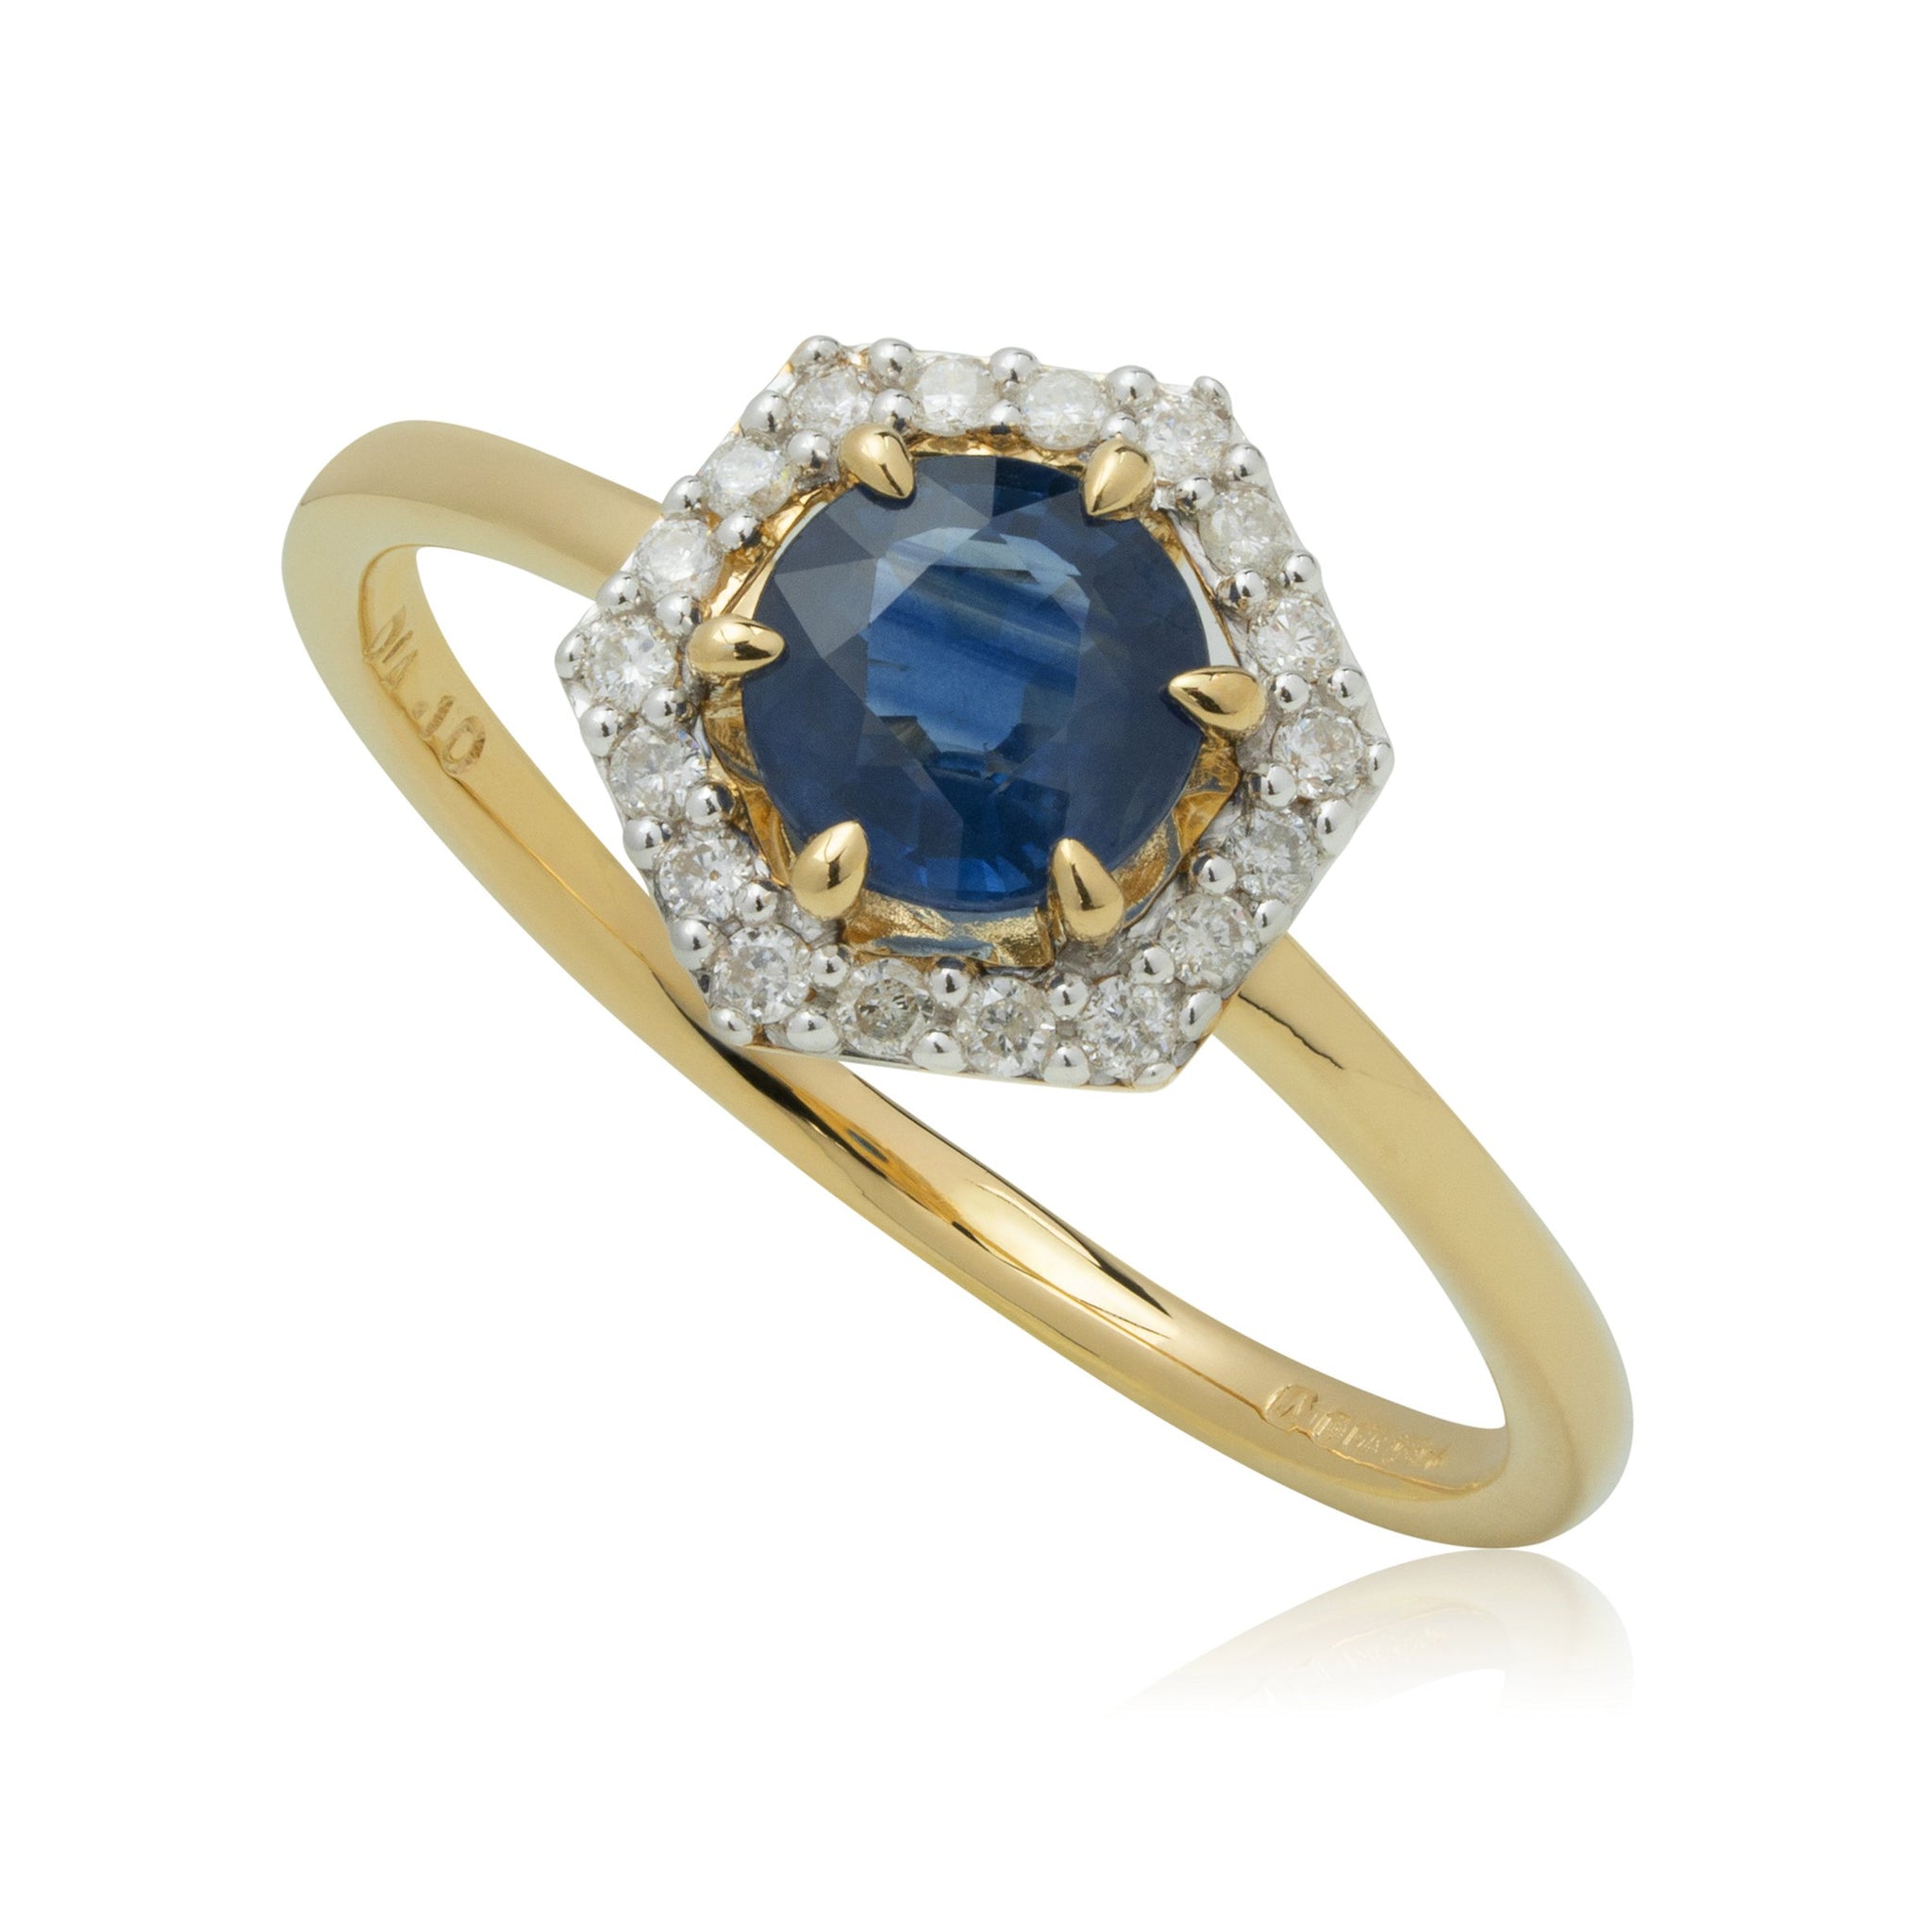 Sapphire & diamond halo engagement ring in 9ct yellow gold